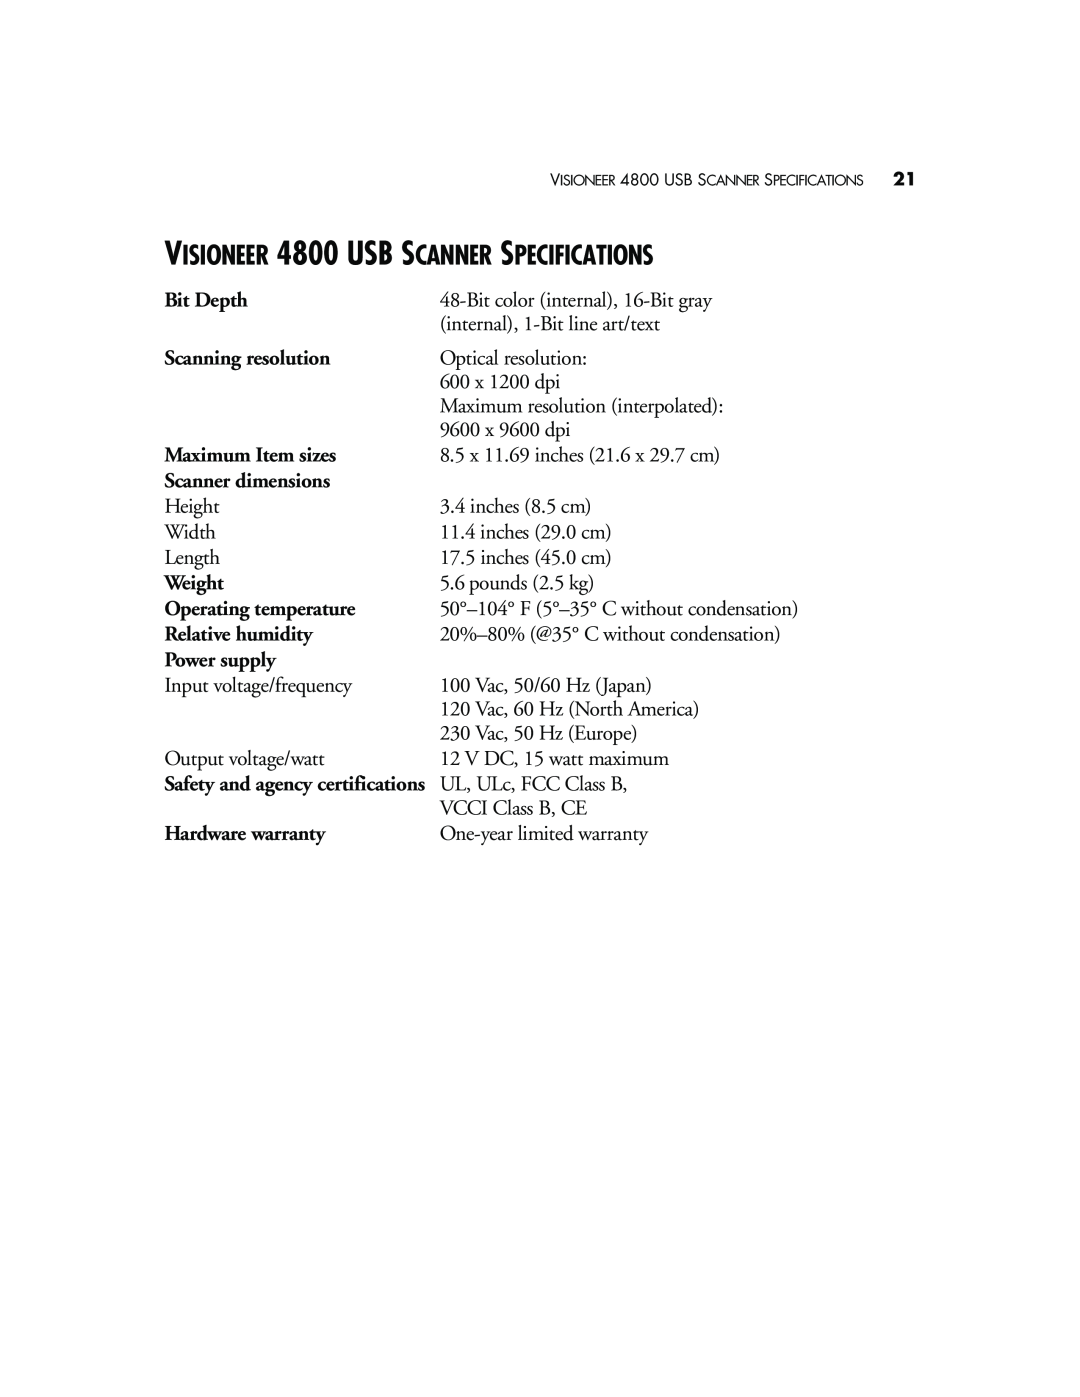 Visioneer manual VISIONEER 4800 USB SCANNER SPECIFICATIONS, Bit Depth, Scanning resolution, Maximum Item sizes, Weight 